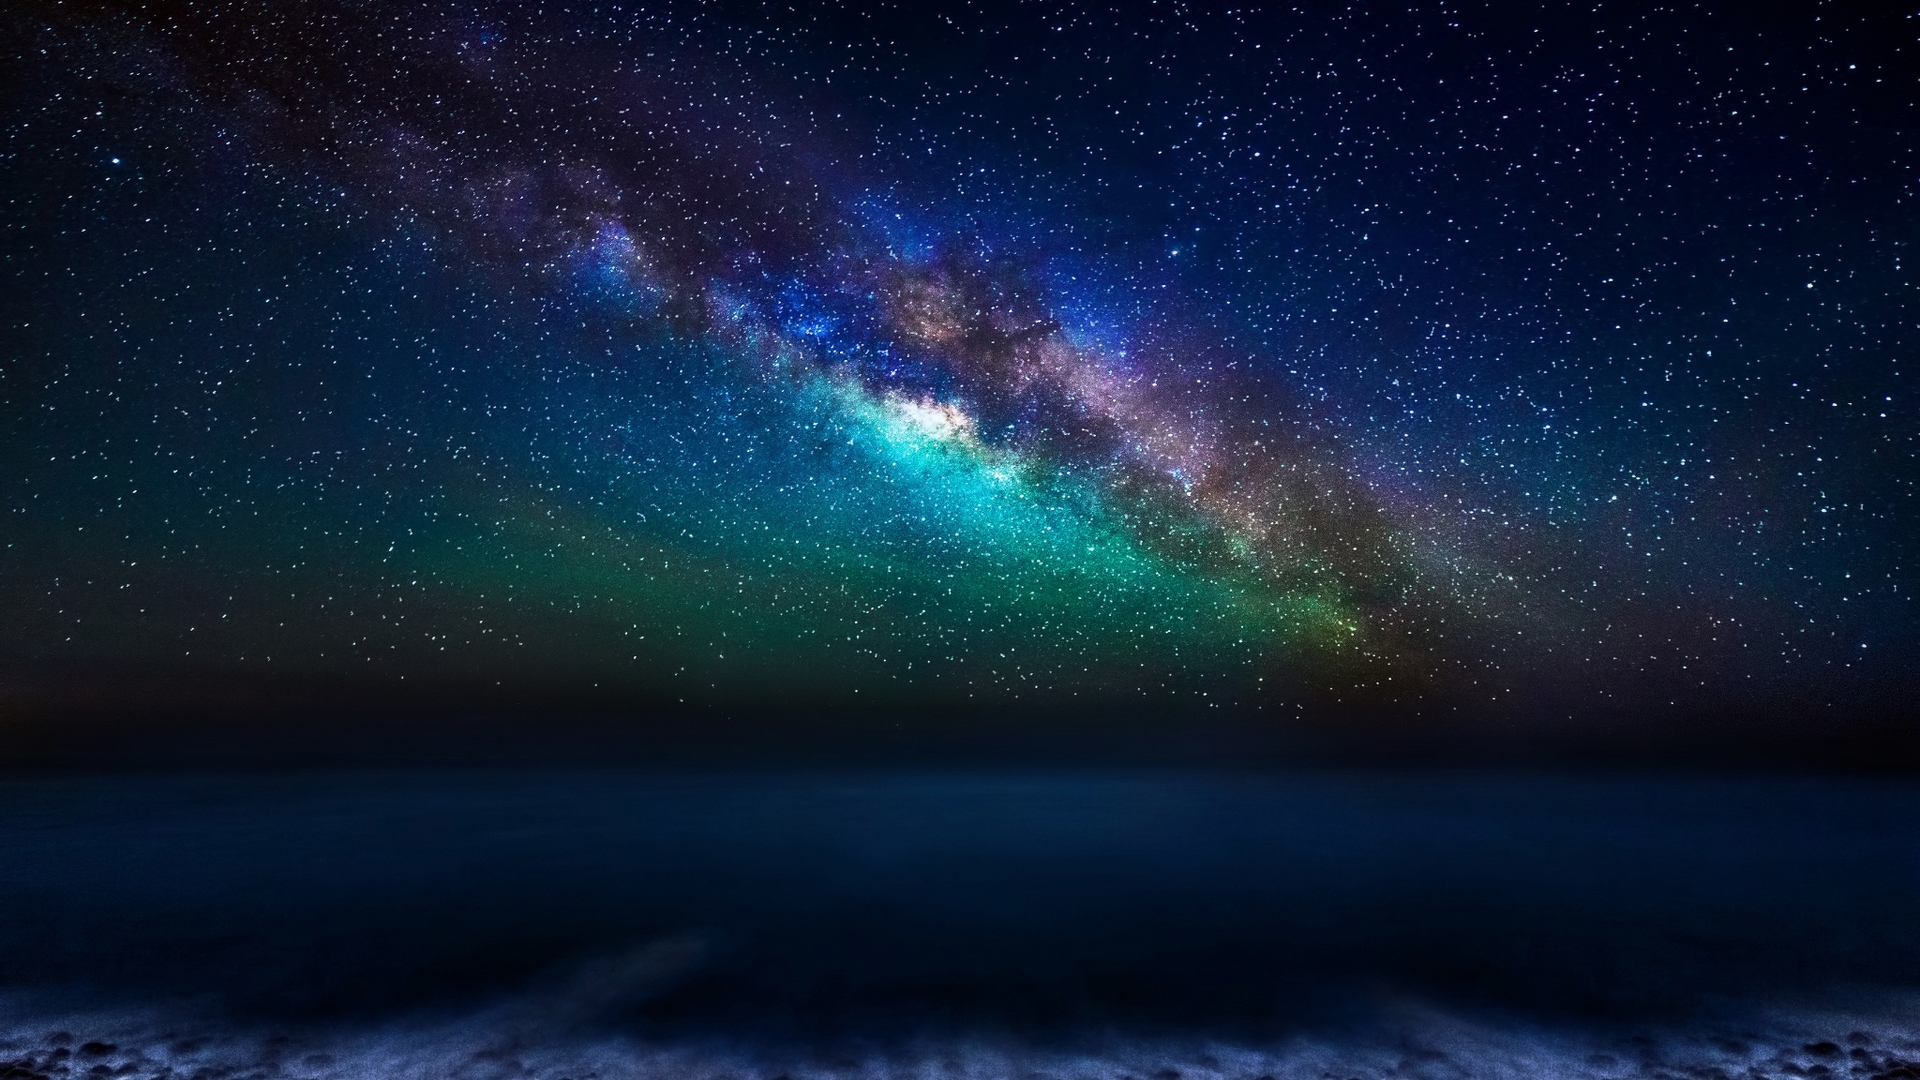 Milky Way Galaxy from the Canary Islands for 1920 x 1080 HDTV 1080p resolution